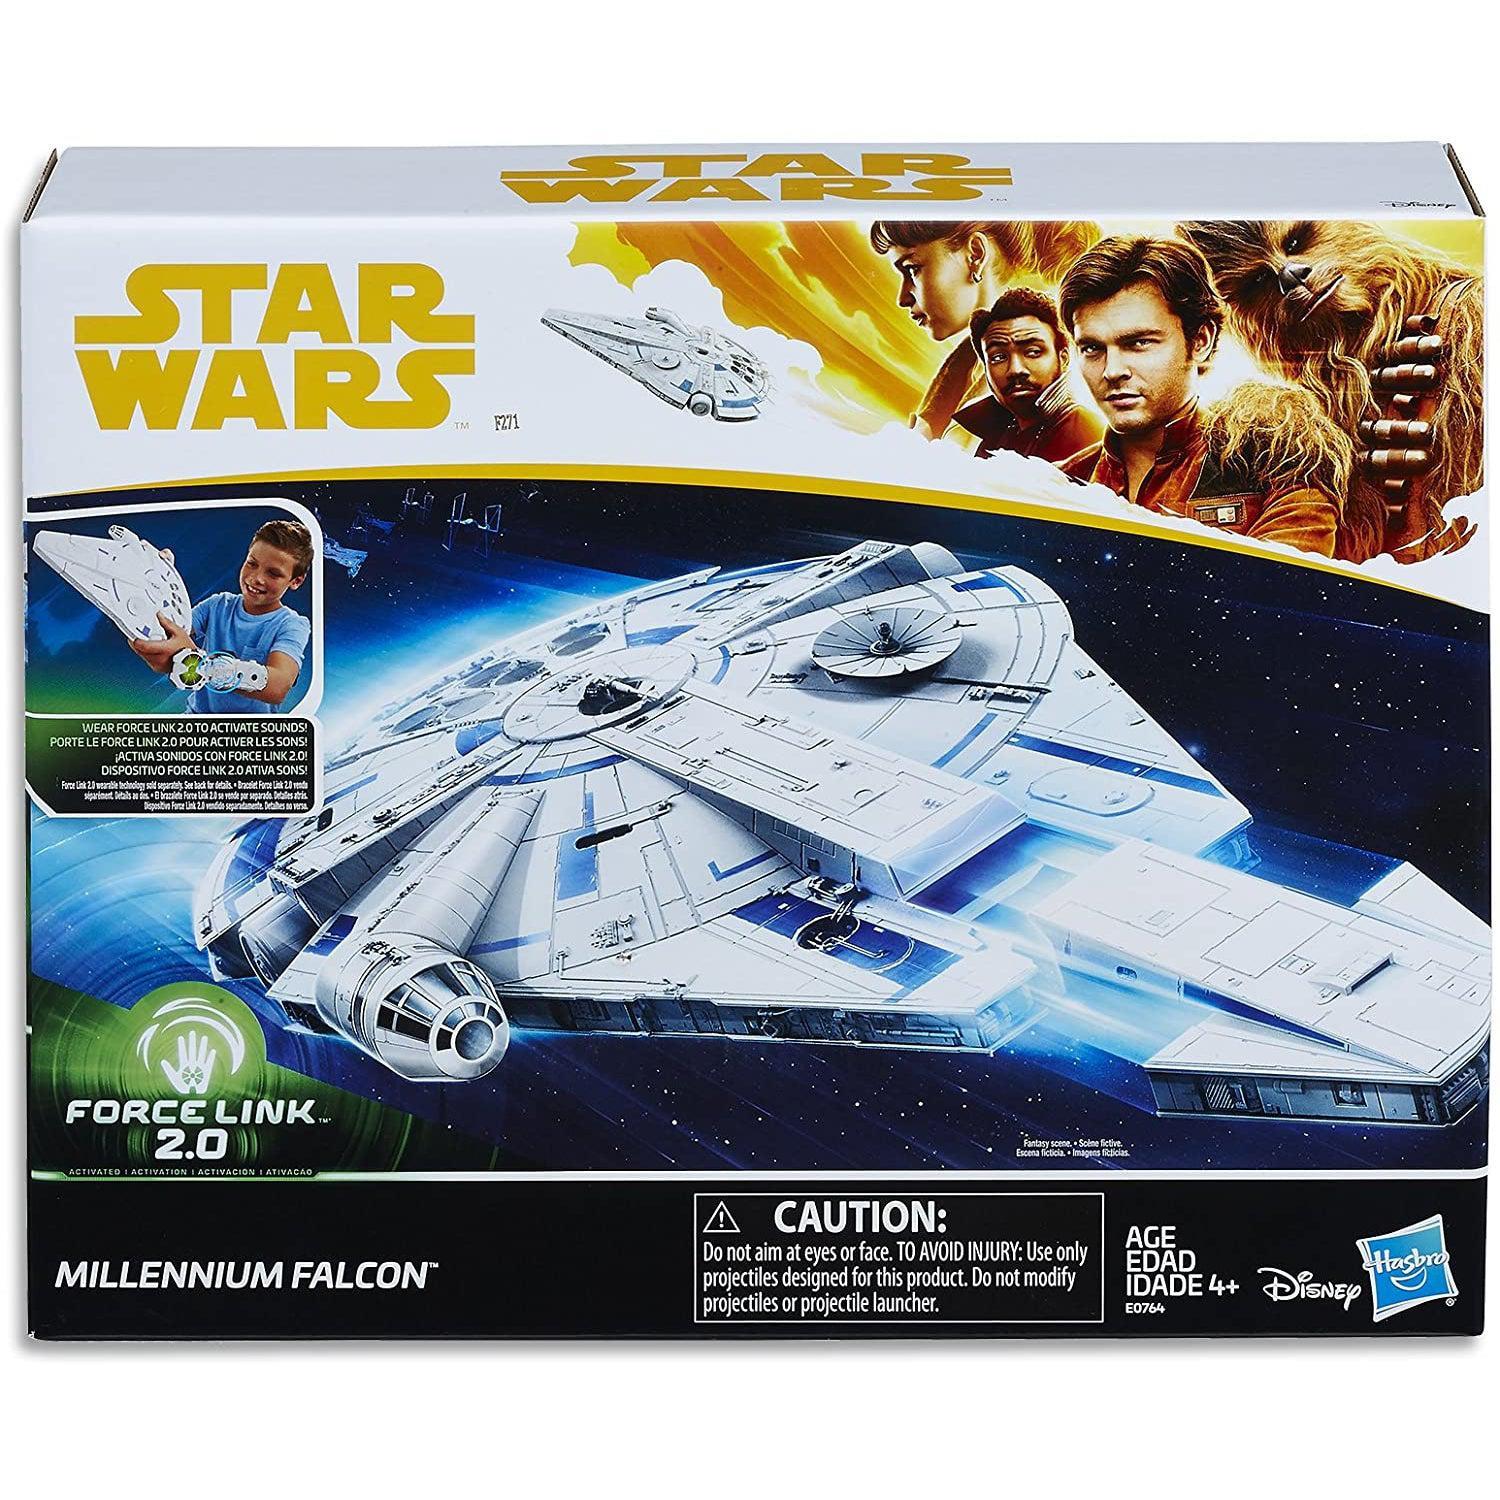 Star Wars SWU S2 Millennium Falcon Play Set by Star Wars - The Magic Toy Shop